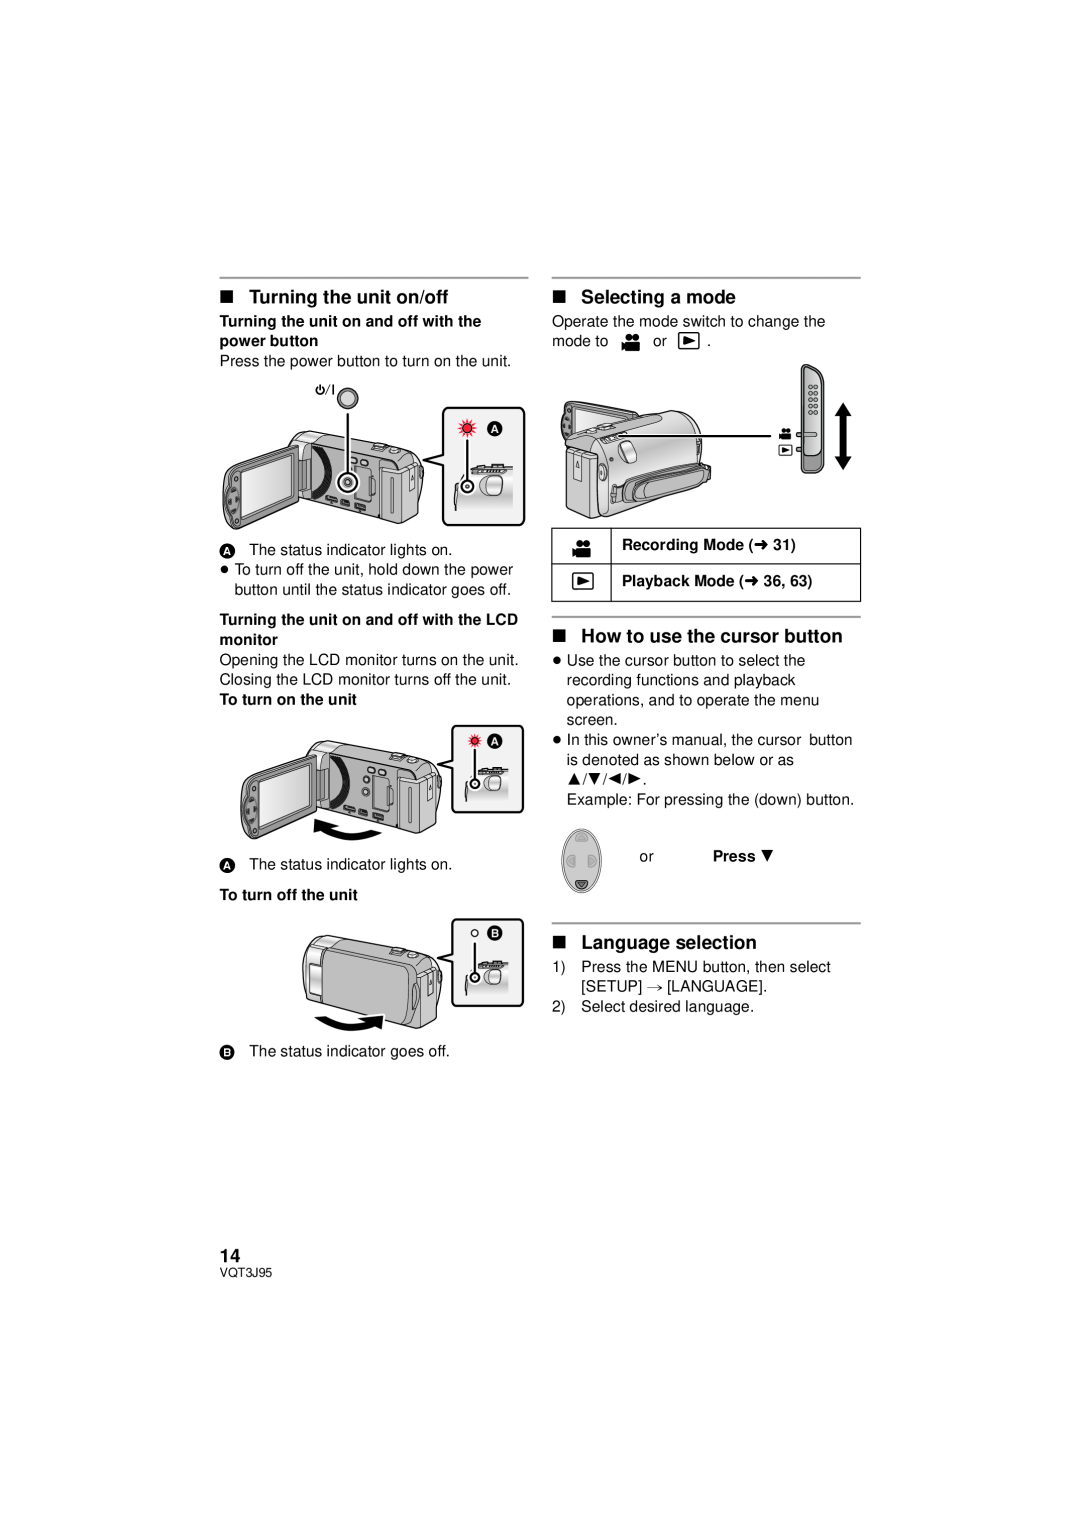 Panasonic HDC-TM40P/PC ∫ Turning the unit on/off, ∫ Selecting a mode, ∫ How to use the cursor button, Language selection 